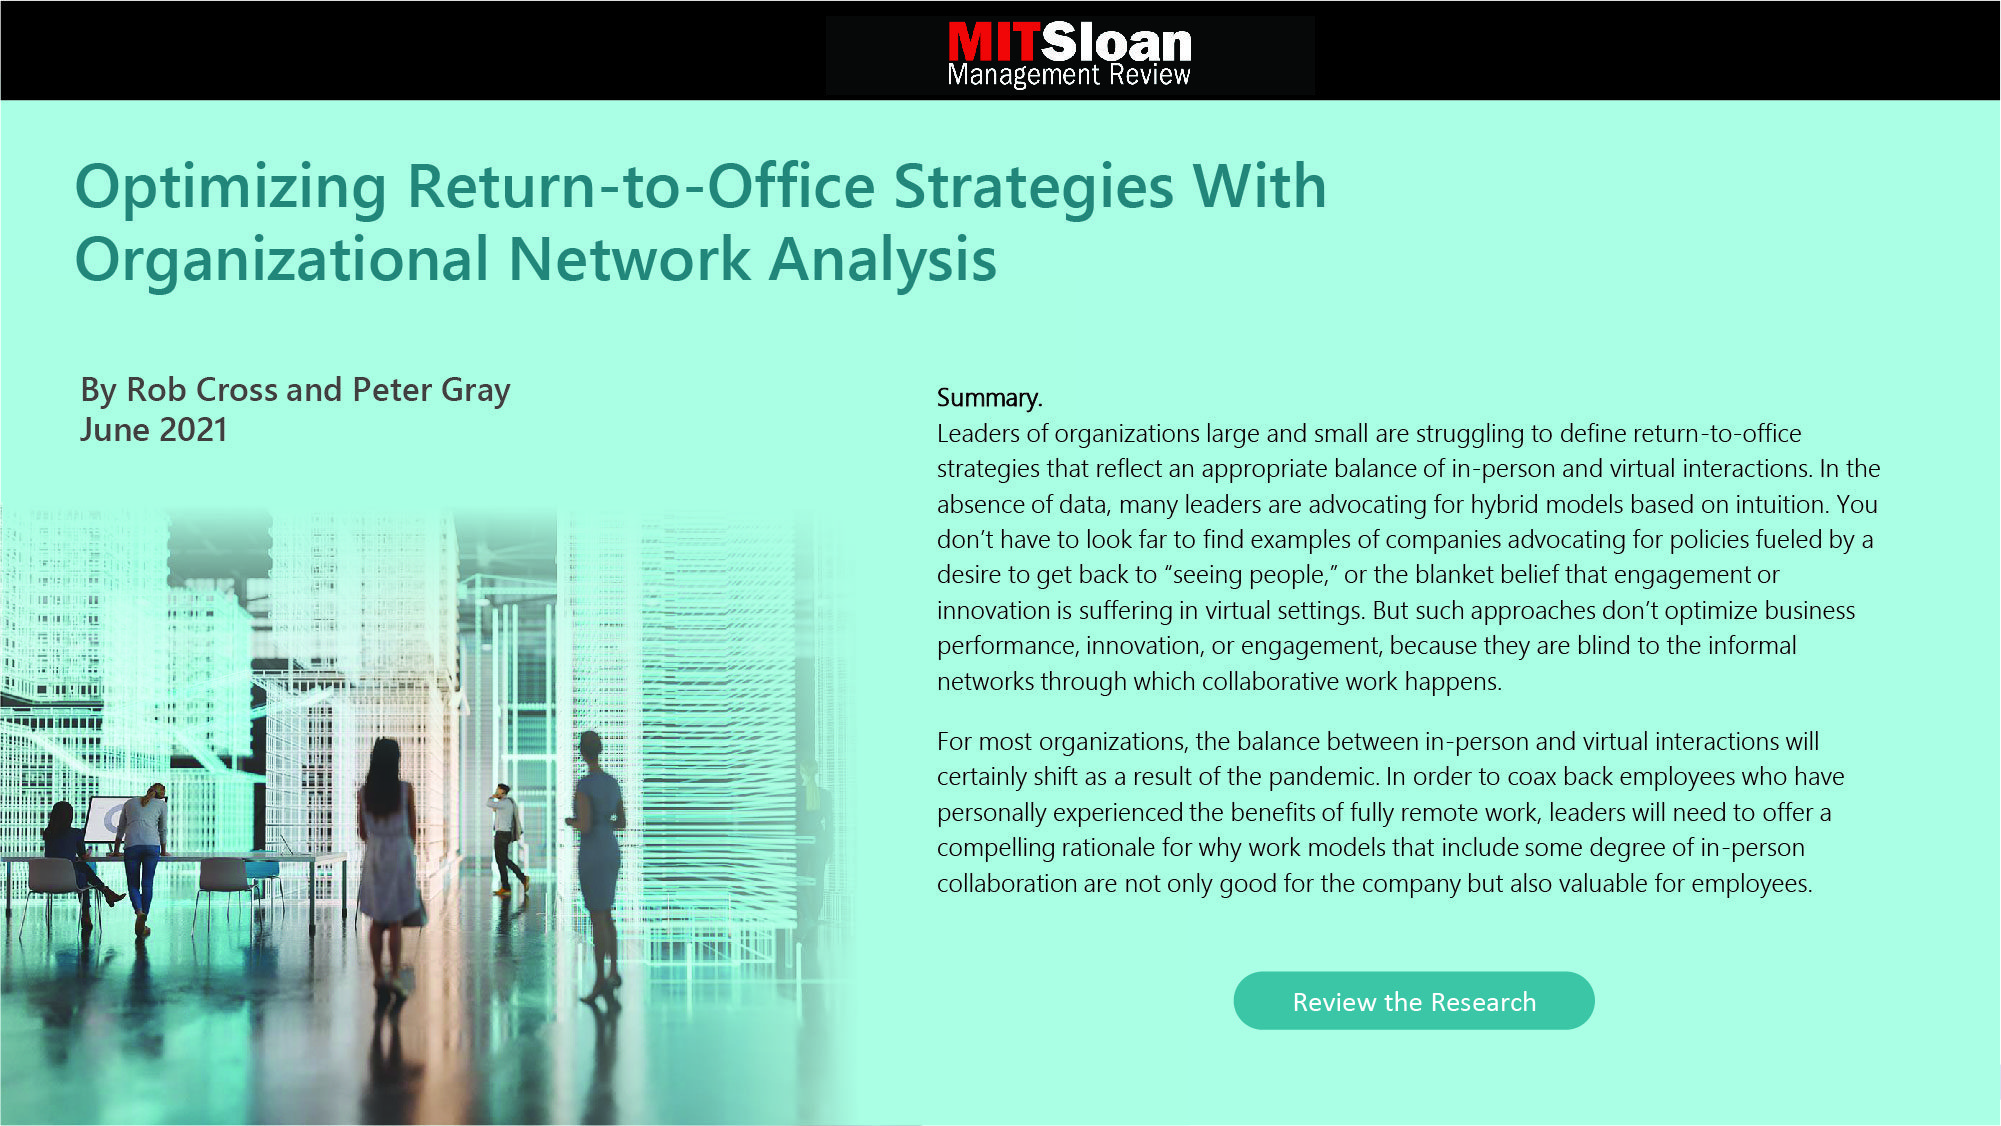 Optimizing Return-to-Office Strategies with ONA